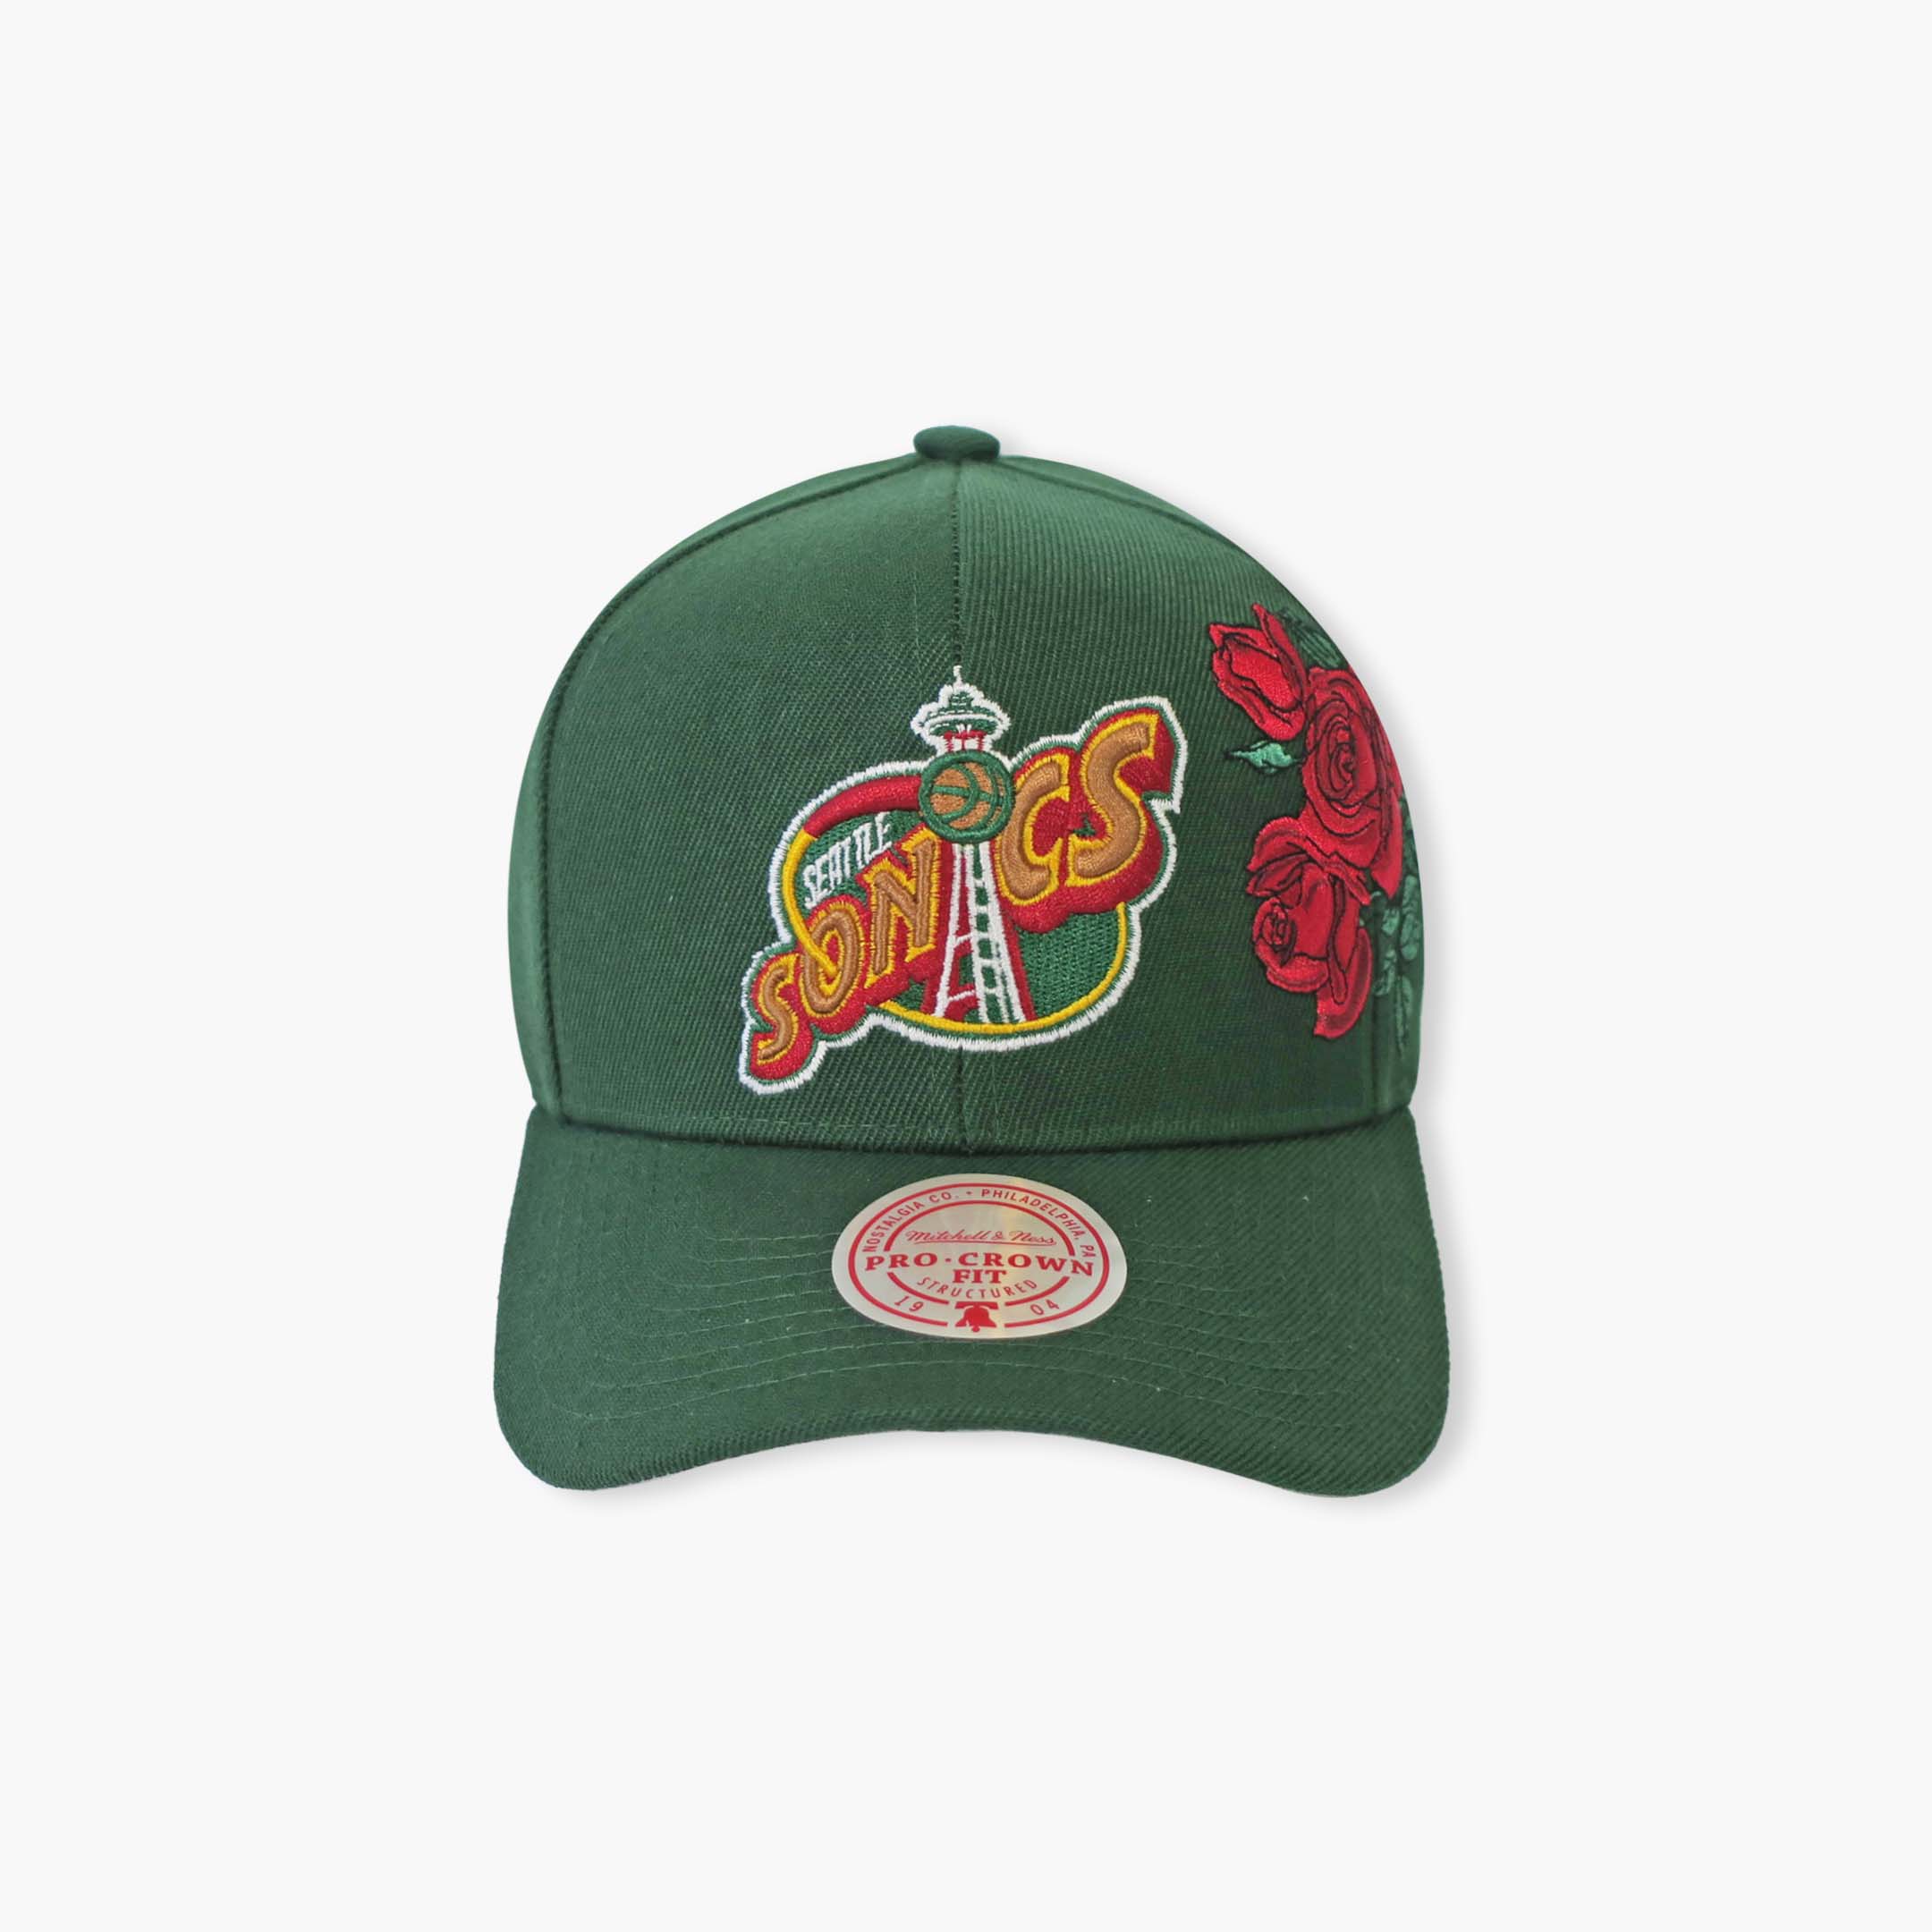 Seattle SuperSonics Roses Pro Crown Hat – Simply Seattle